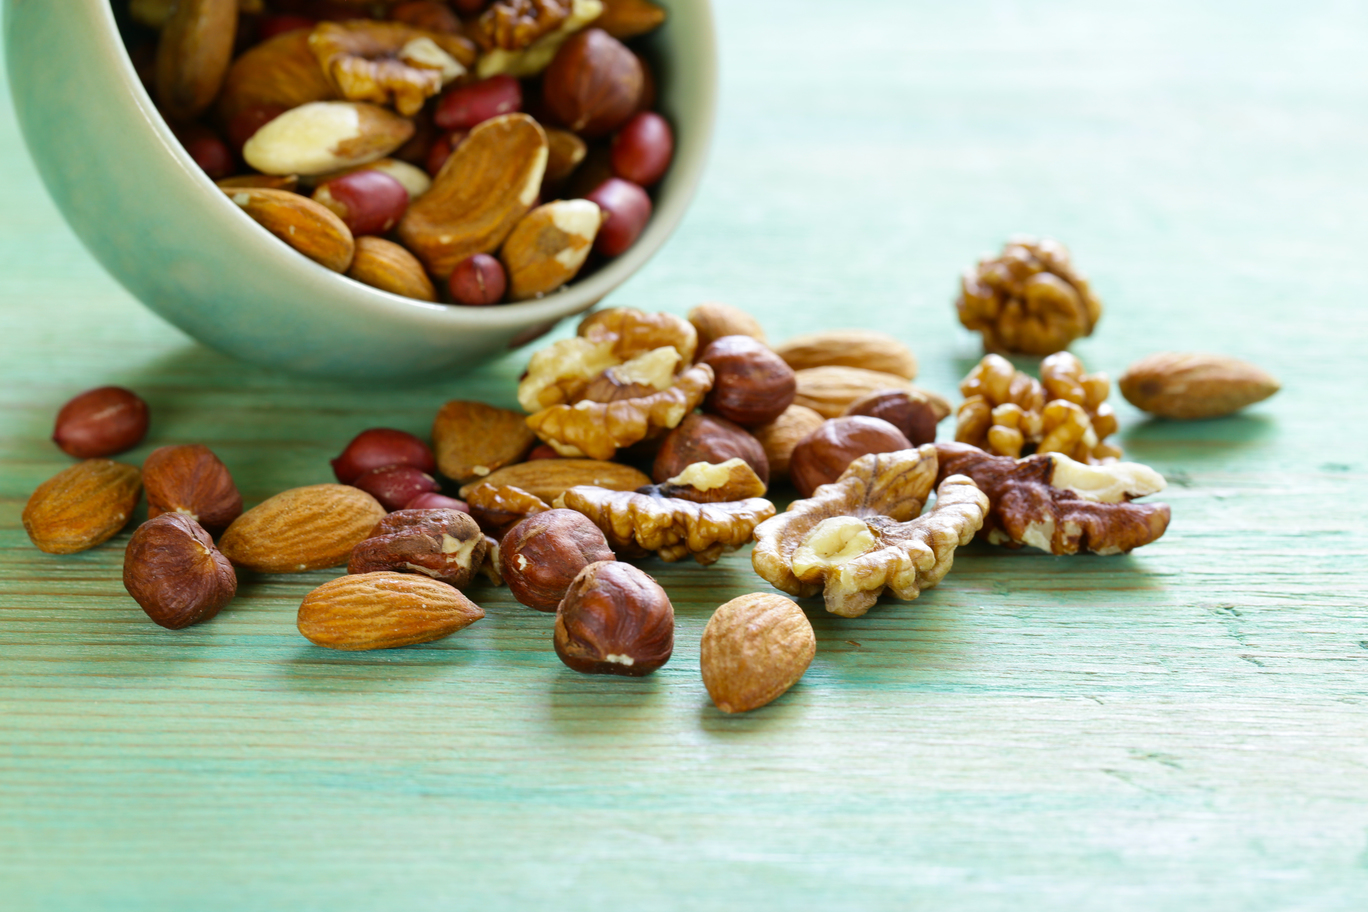 8 great Keto diet snacks to try. These are mixed nuts.